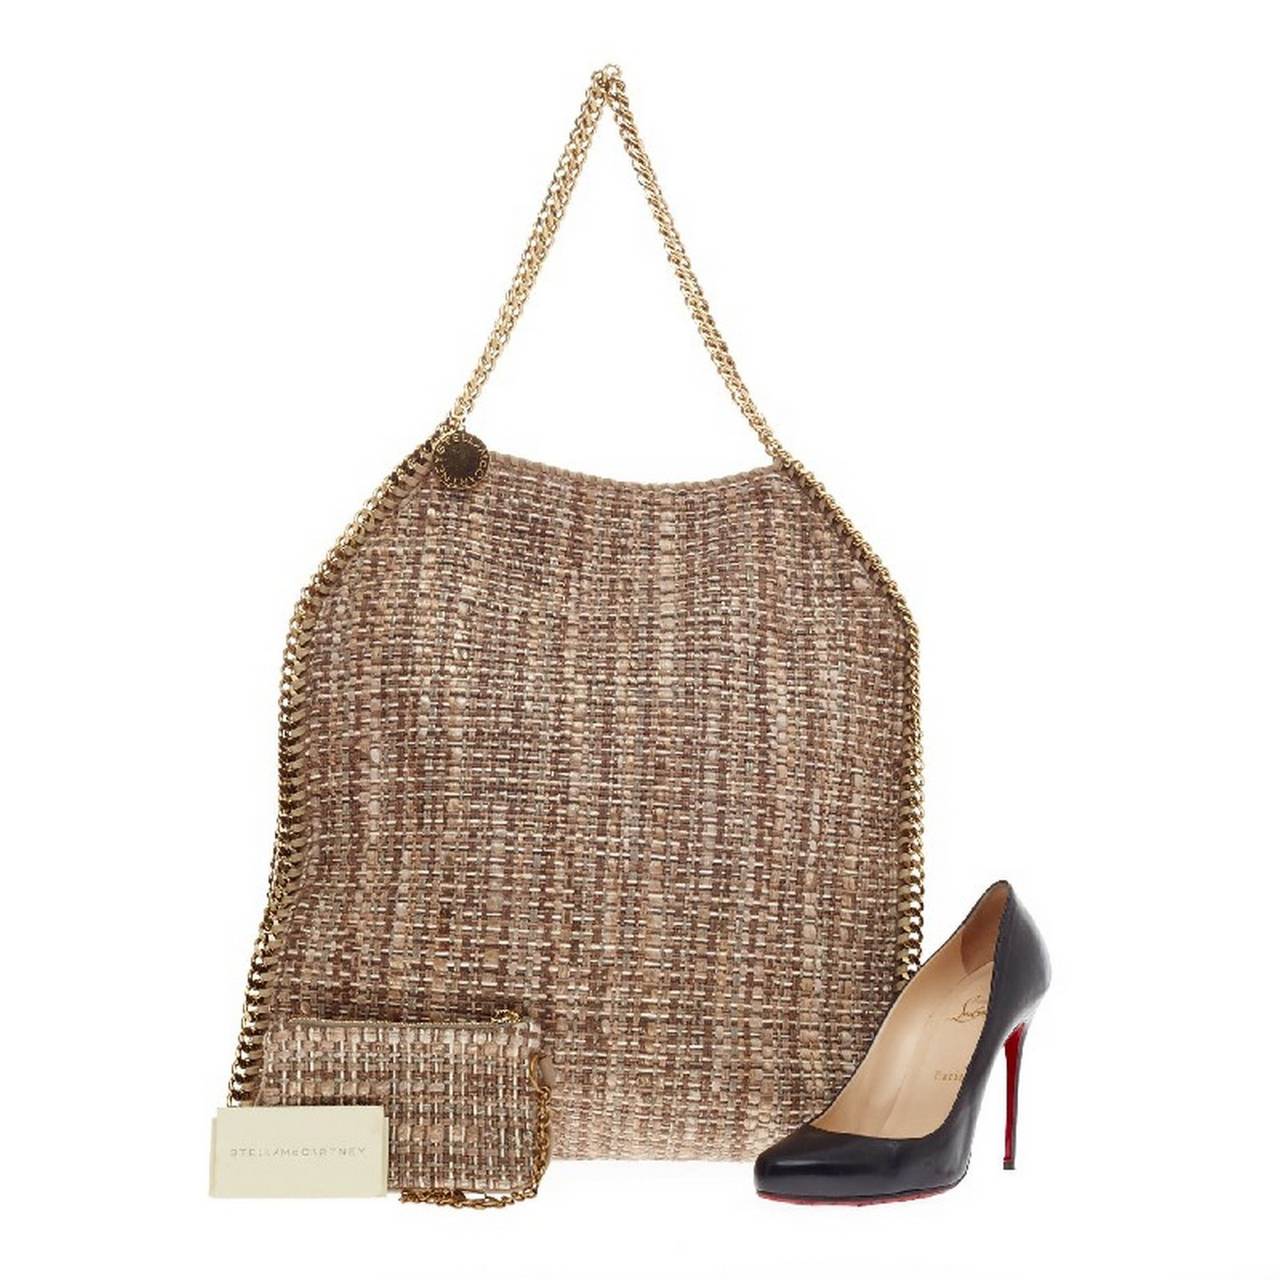 This authentic Stella McCartney Falabella Tote Boucle in size Large is perfect for casual day-to-day excursions. Crafted in natural hues boucle tweed, this soft tote features tonal brown and beige shades, gold metal chain link strap and trimmings,